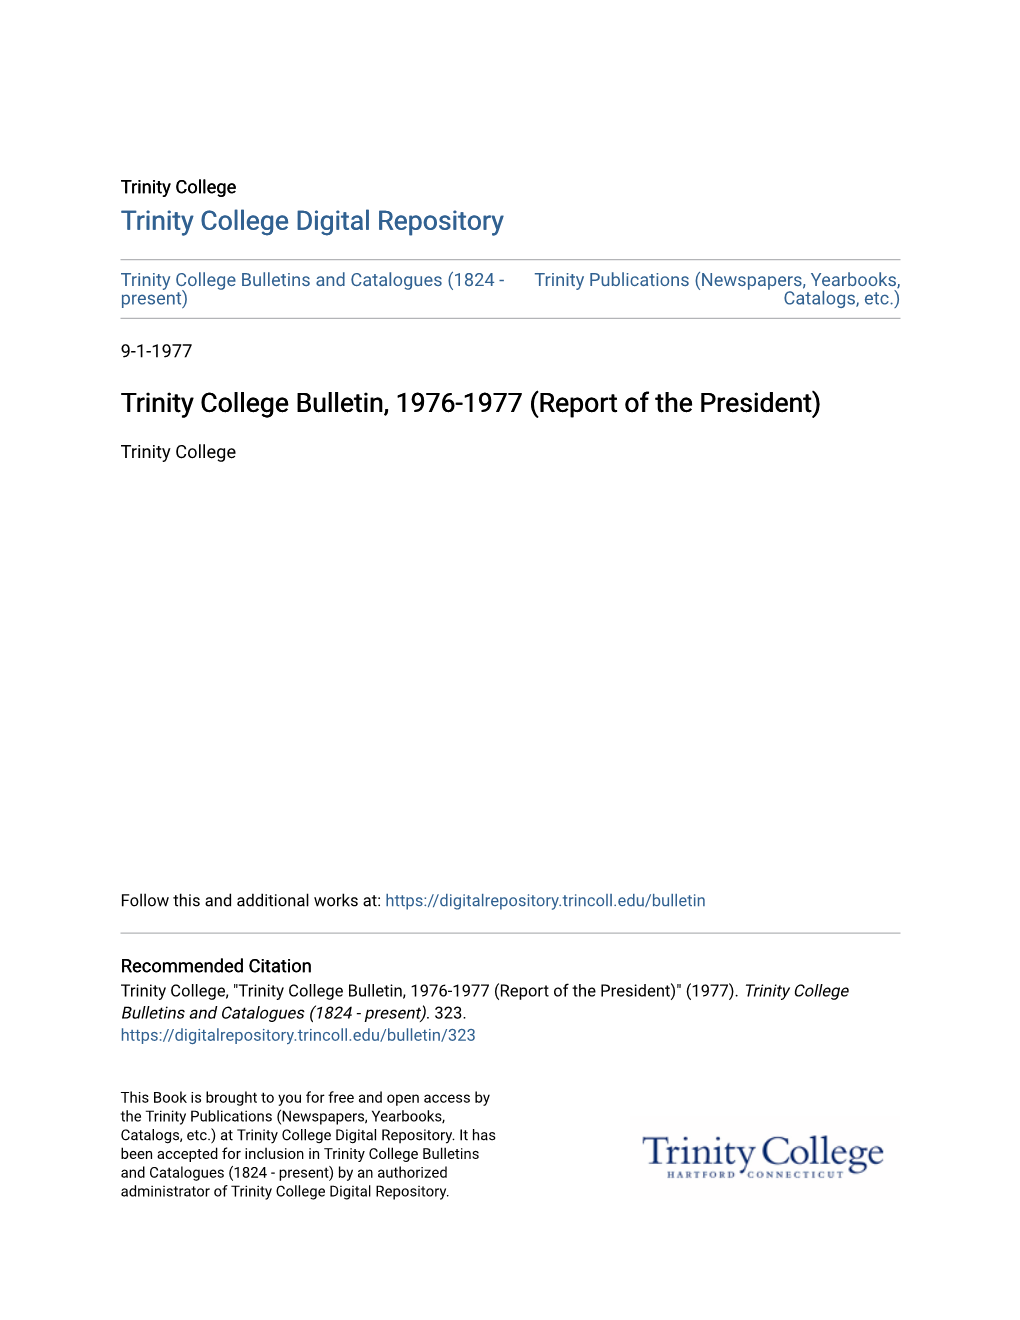 Trinity College Bulletin, 1976-1977 (Report of the President)